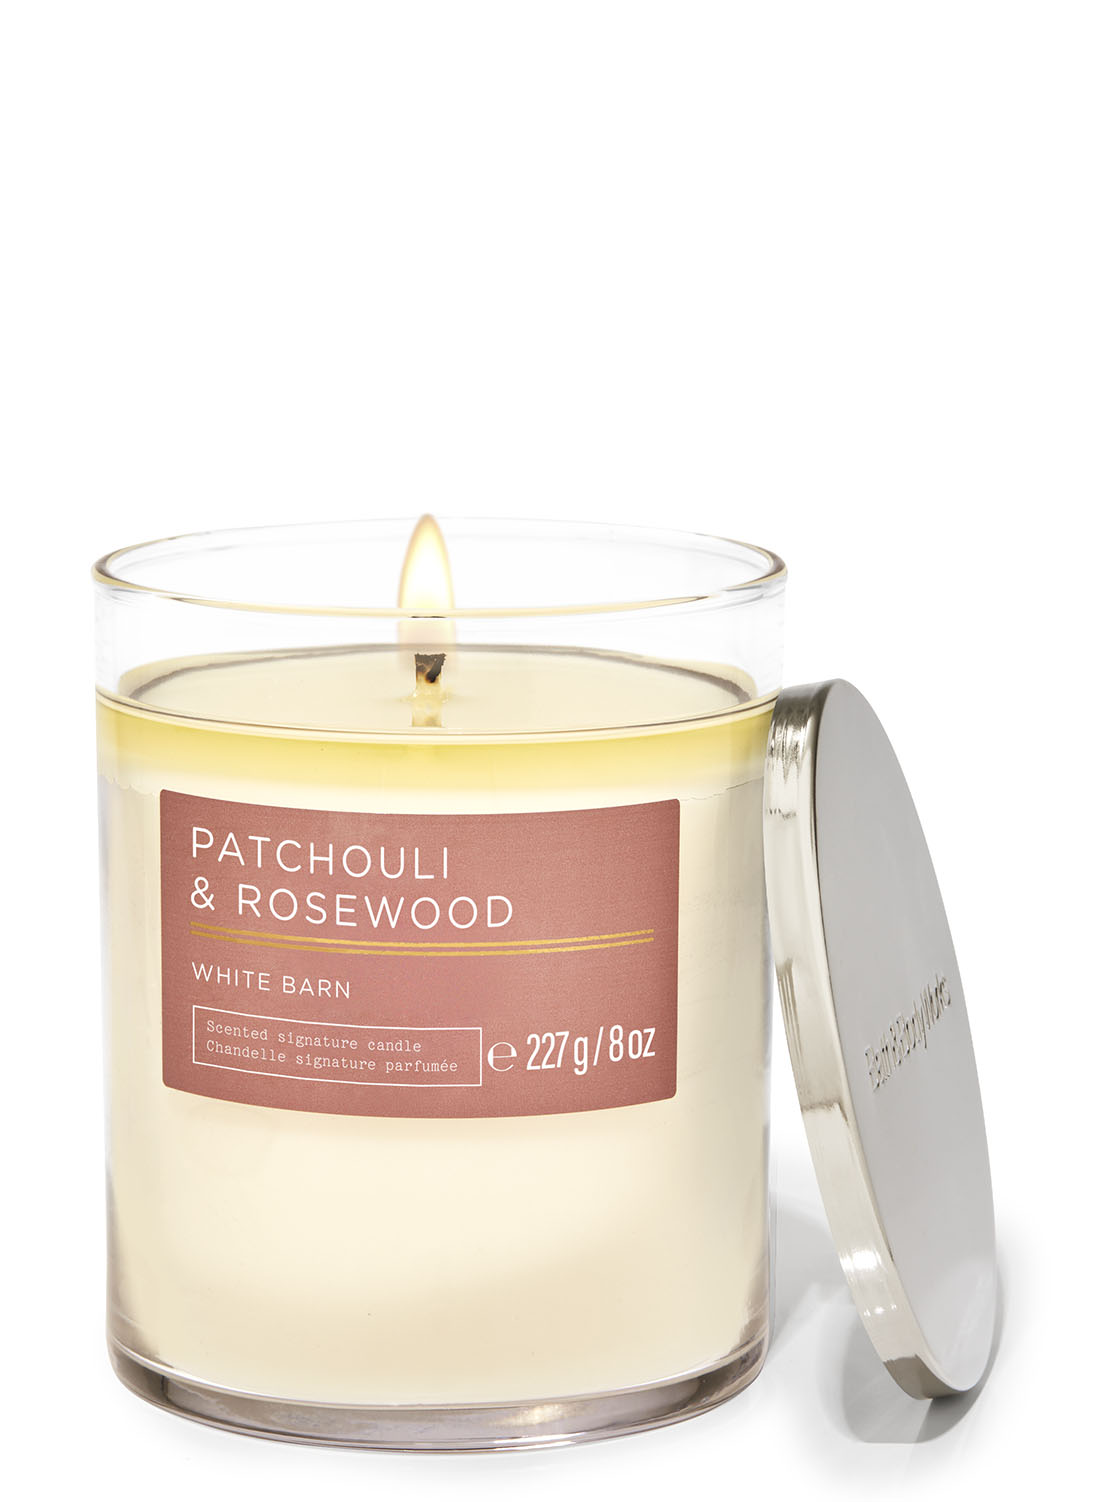 Patchouli & Rosewood Signature Single Wick Candle | Bath and Body Works